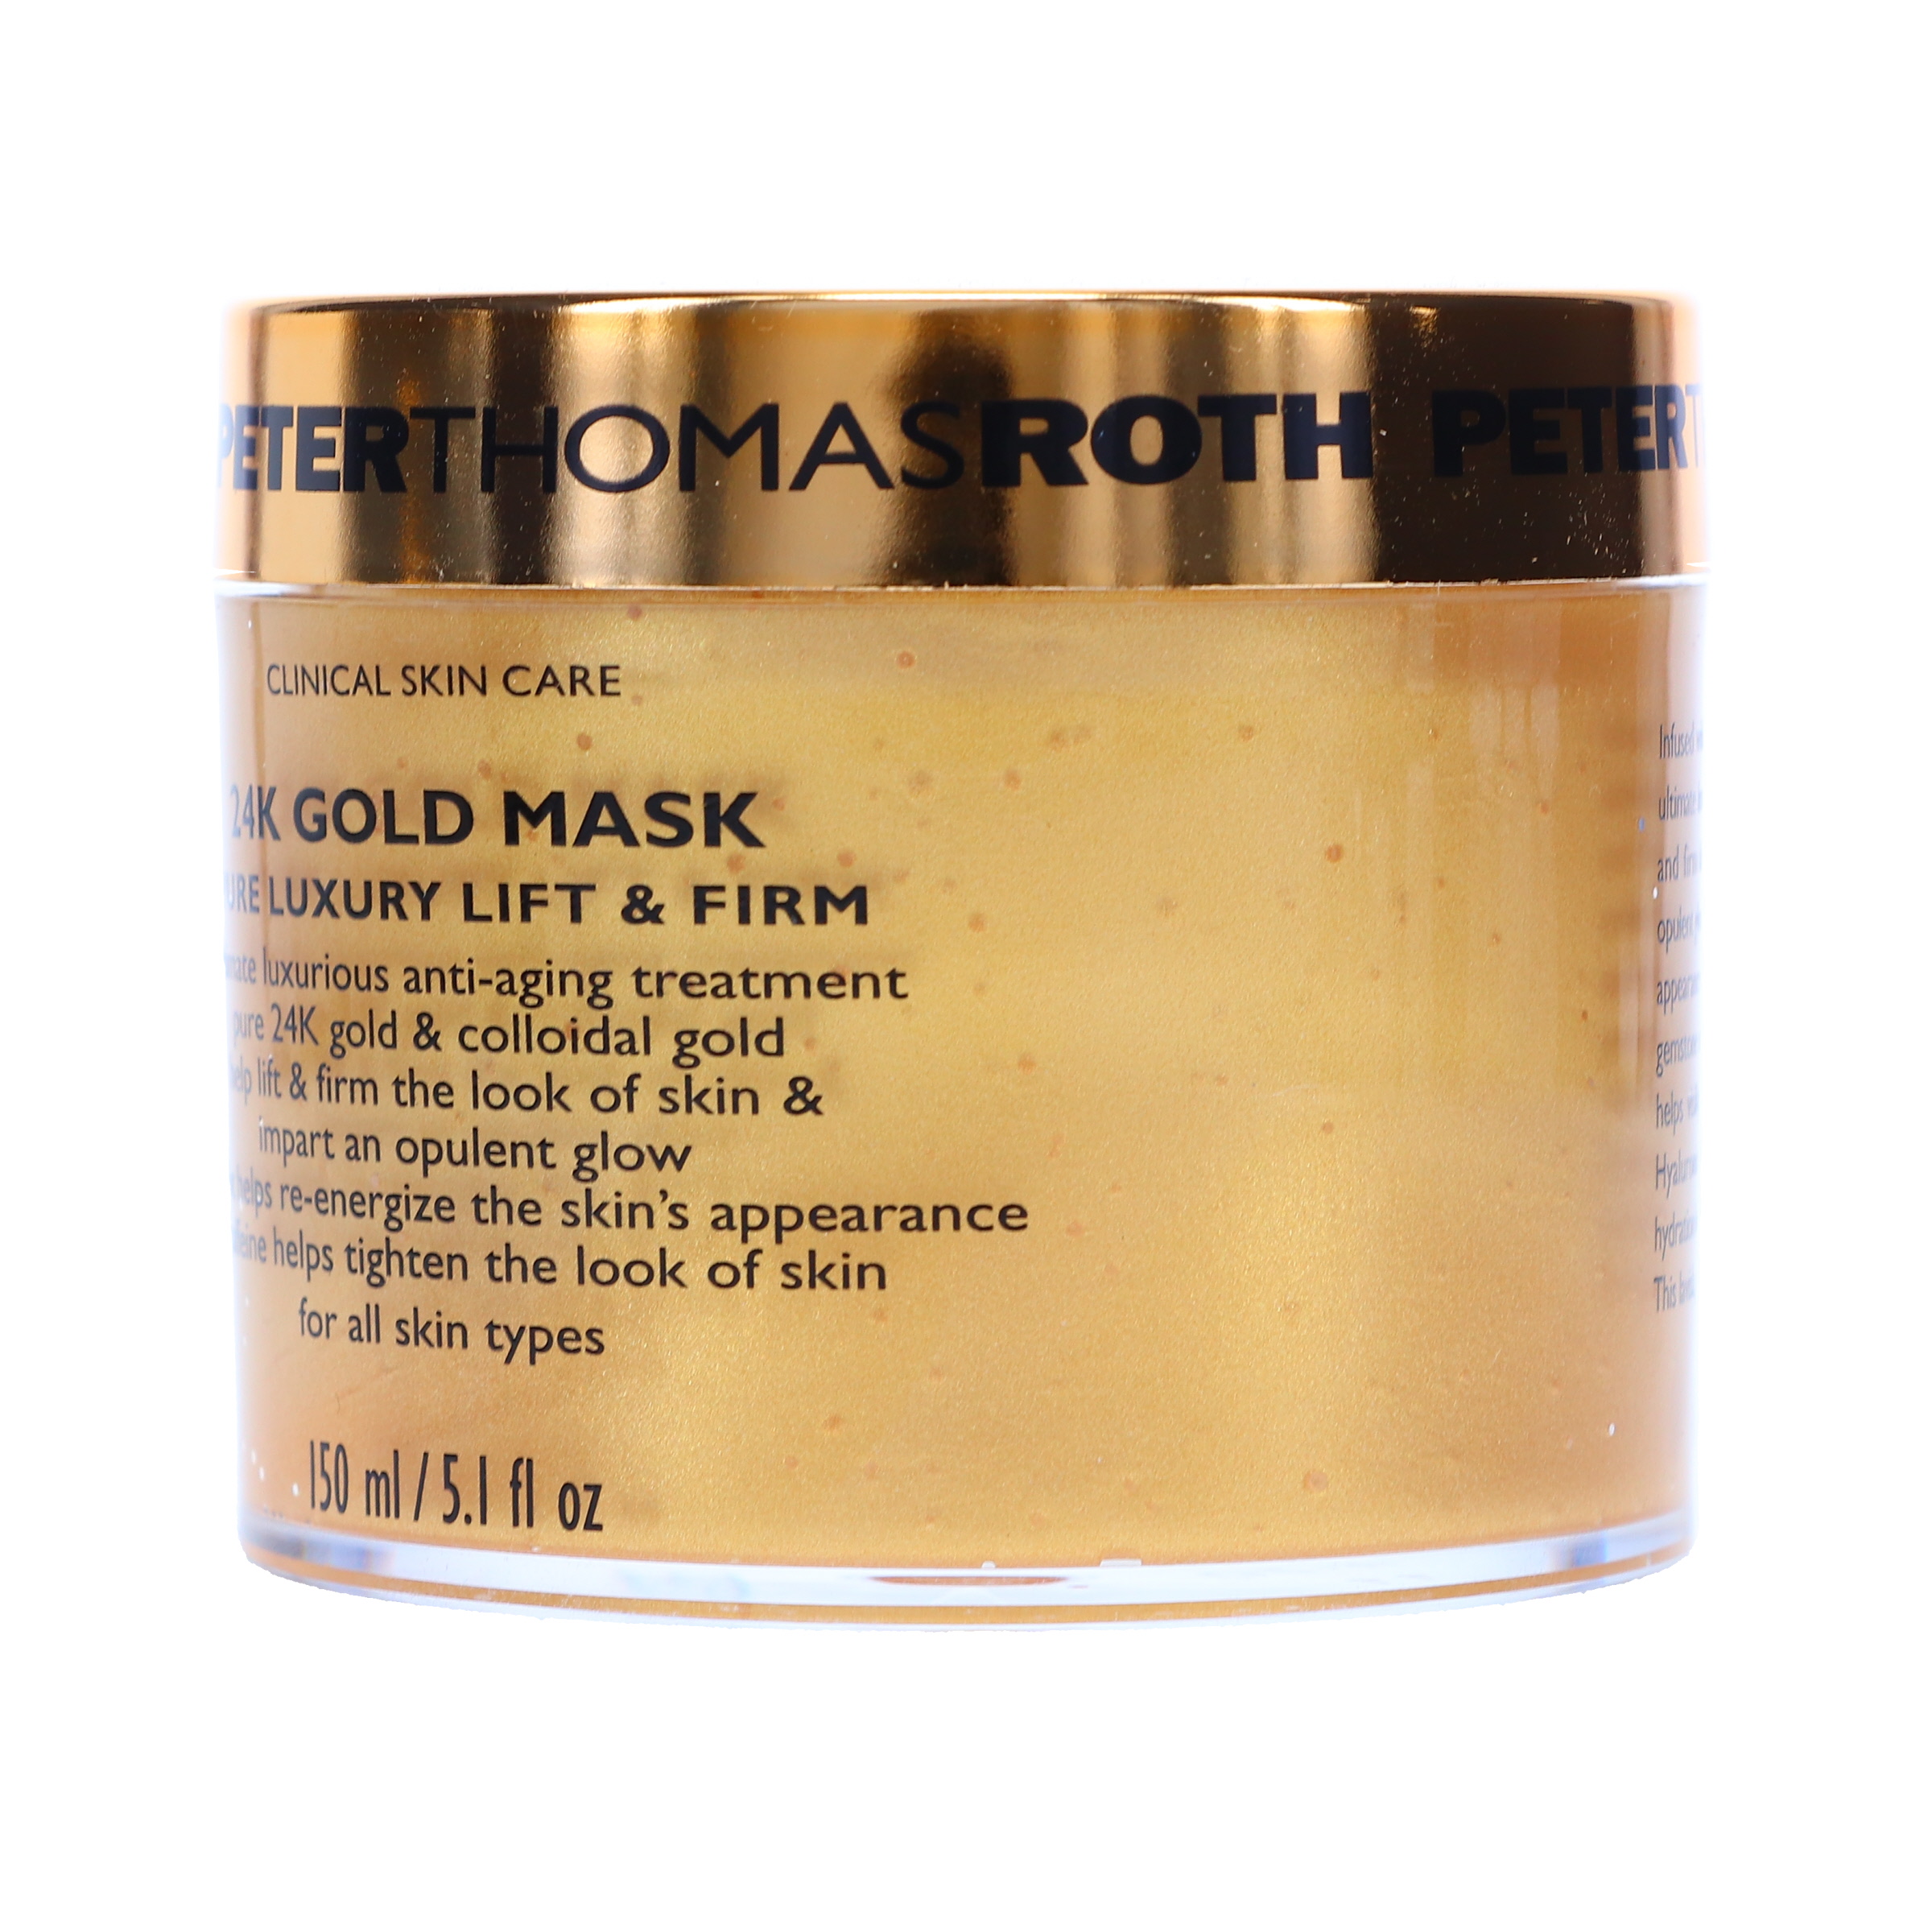 Peter Thomas Roth 24K Gold Mask Pure Luxury Lift & Firm Mask 5.1 oz - image 2 of 8